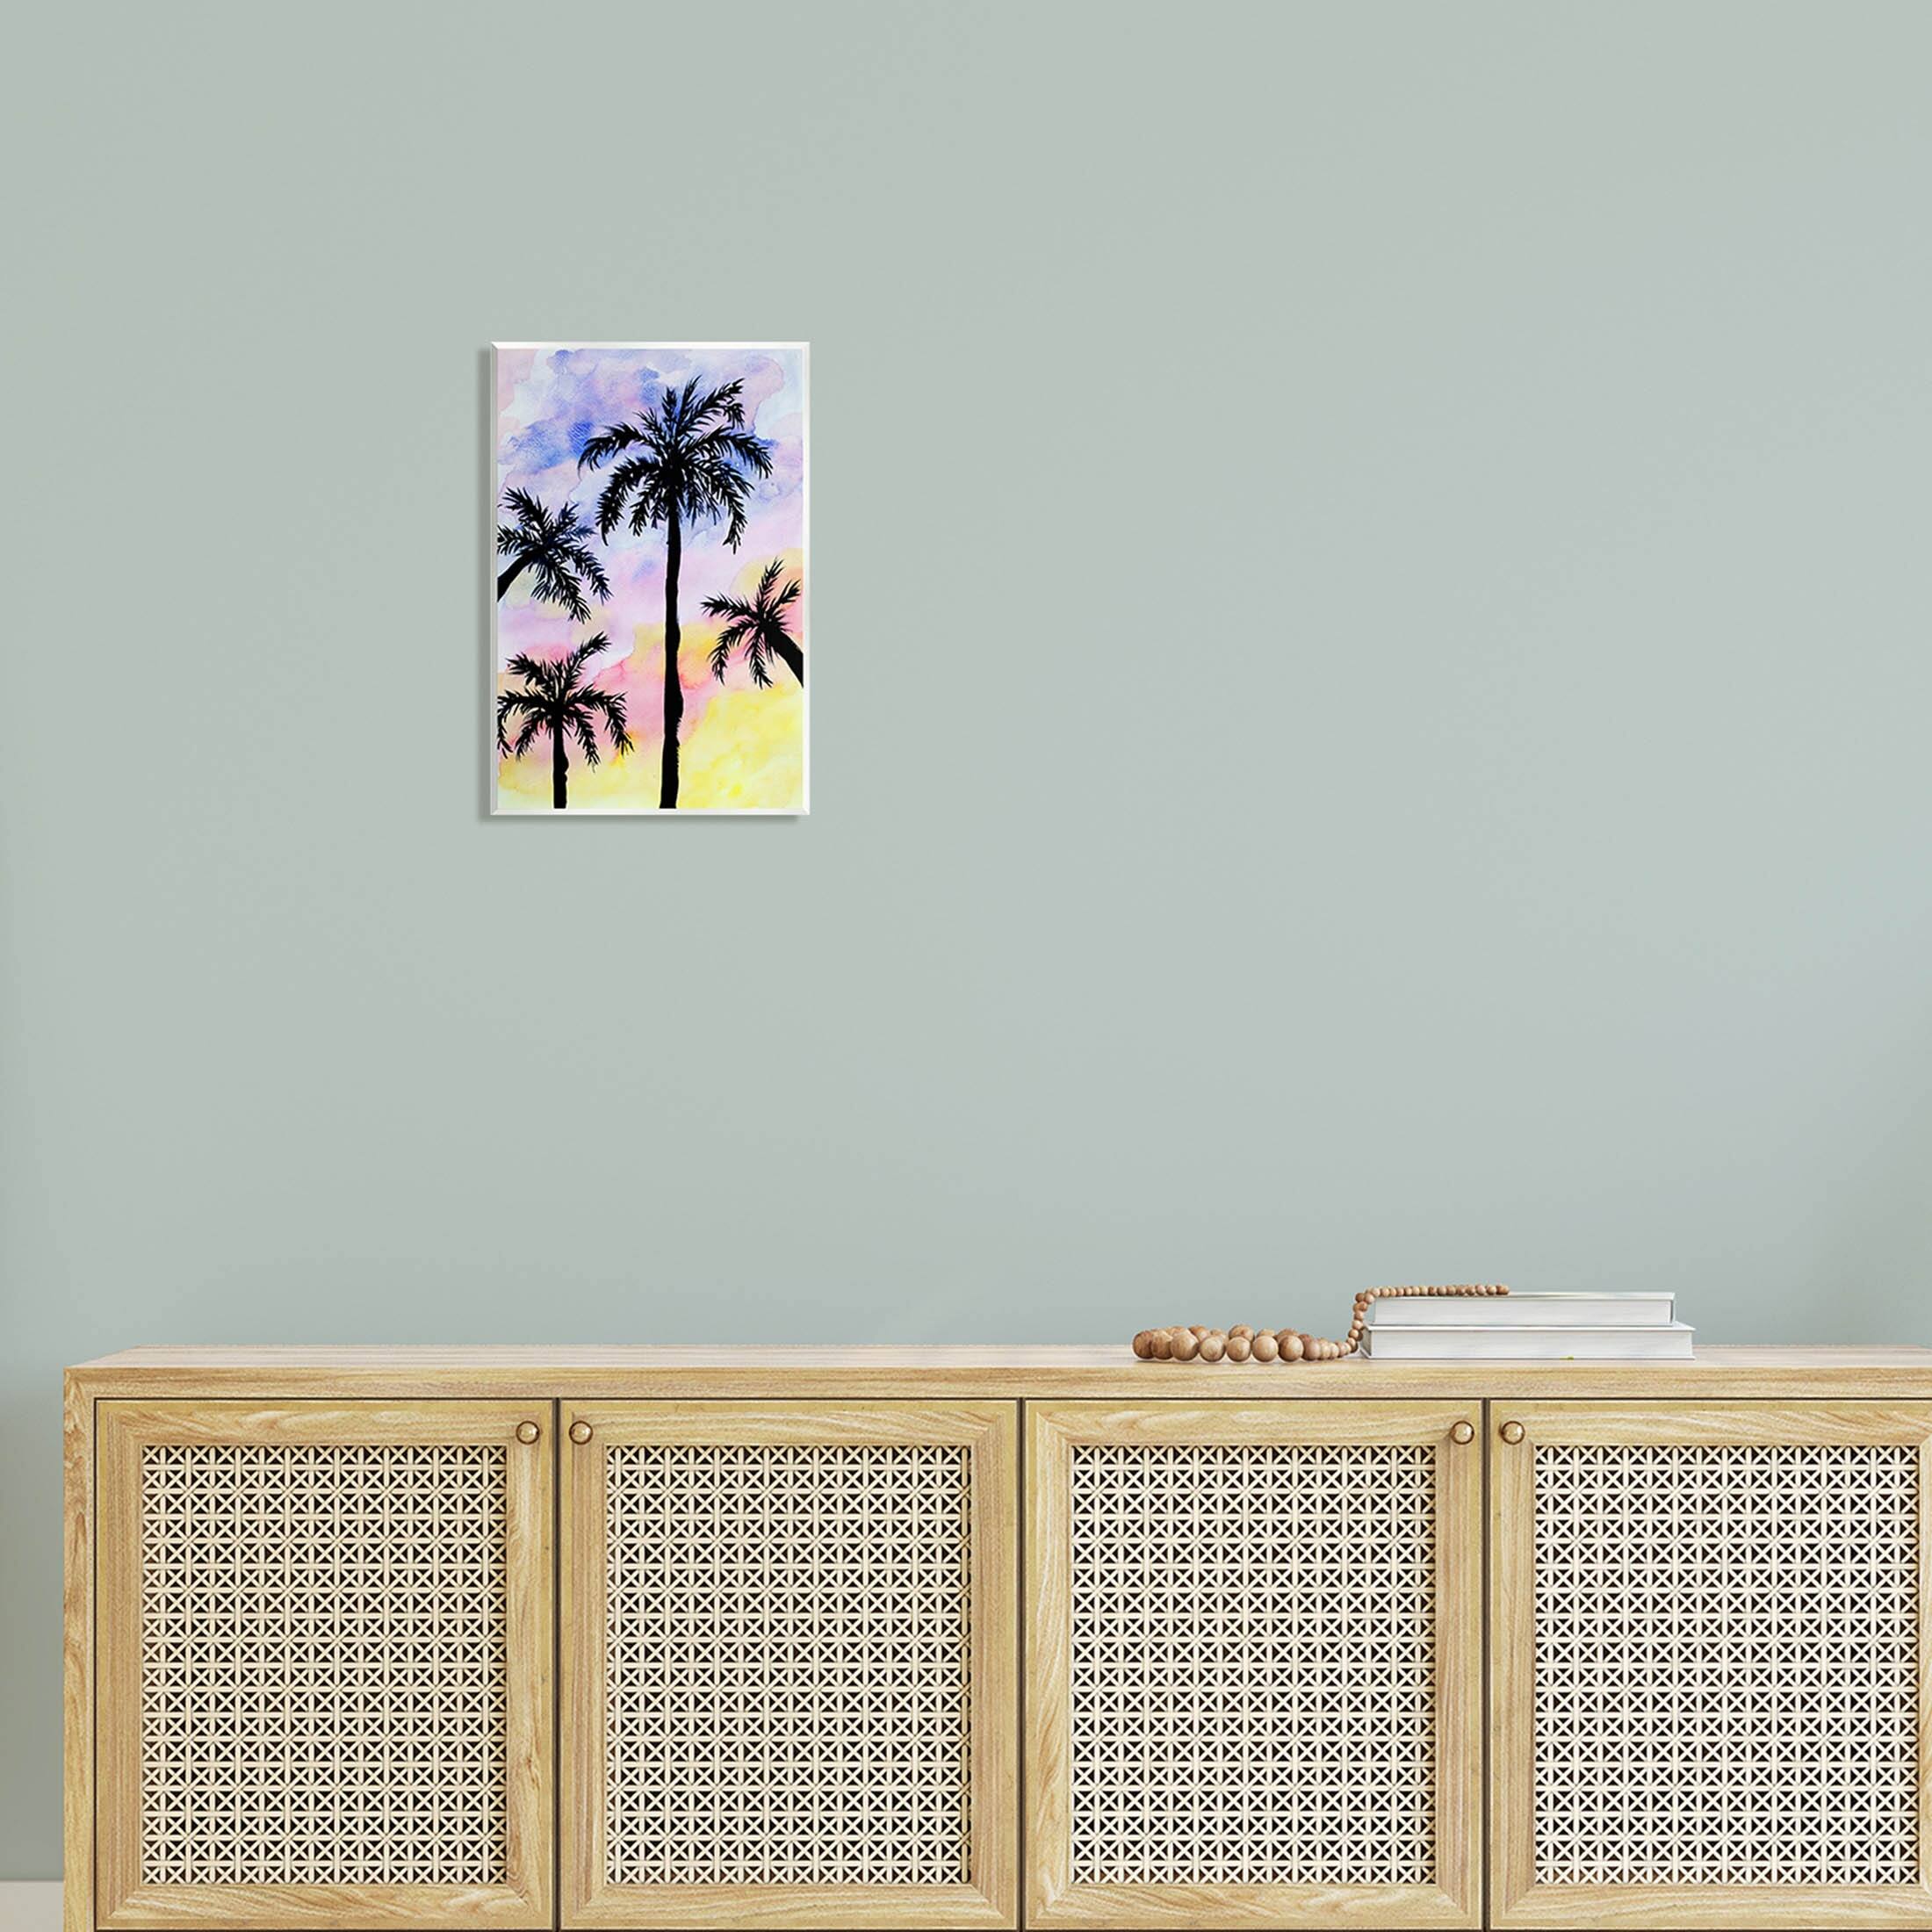 Stupell Palm Tree Silhouettes Sunset Sky Wall Plaque Art by Sebastian ...